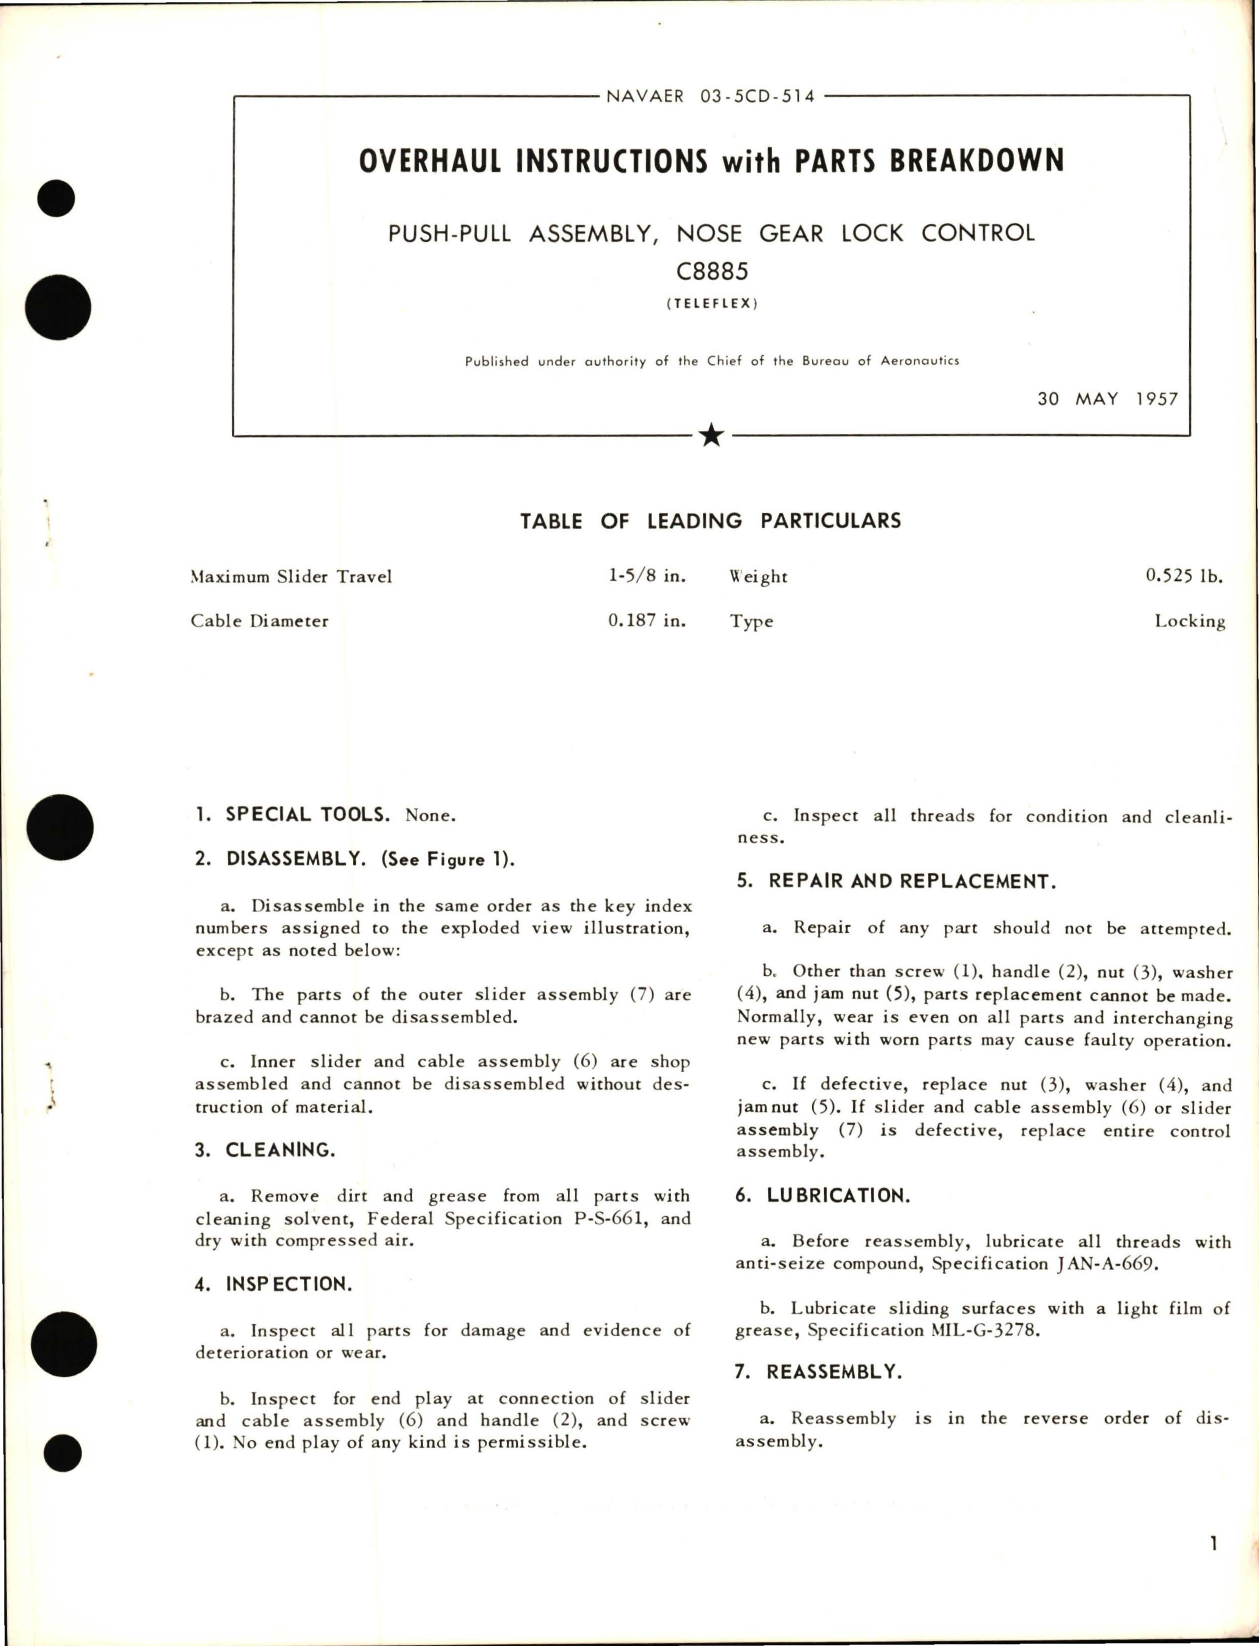 Sample page 1 from AirCorps Library document: Overhaul Instructions with Parts Breakdown for Push-Pull Assembly, Nose Gear Lock Control C8885